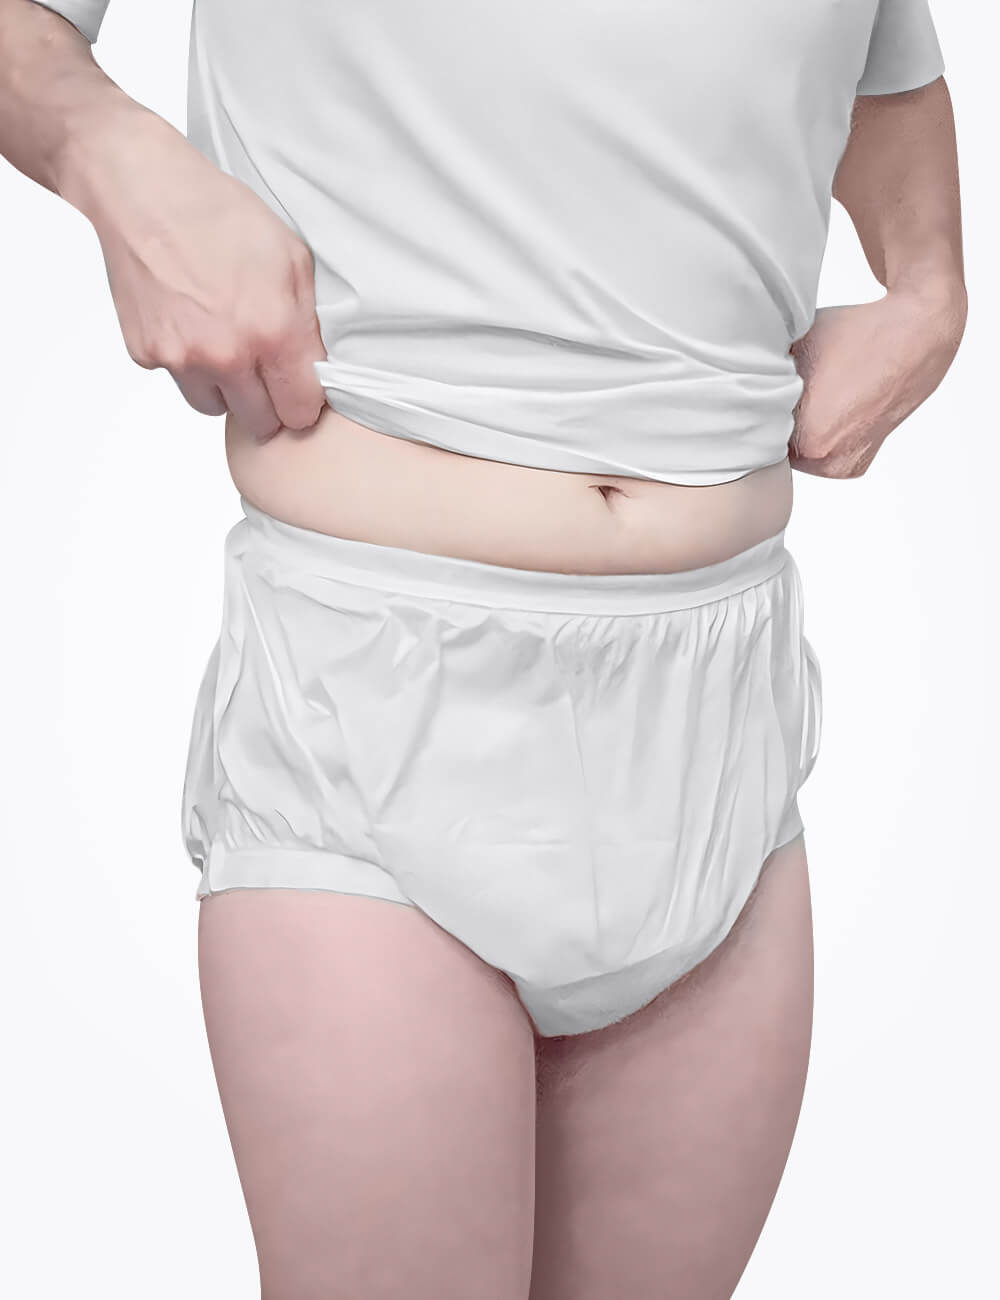 Heavy Incontinence Pants  Adult Unisex Waterproof Incontinence Pant